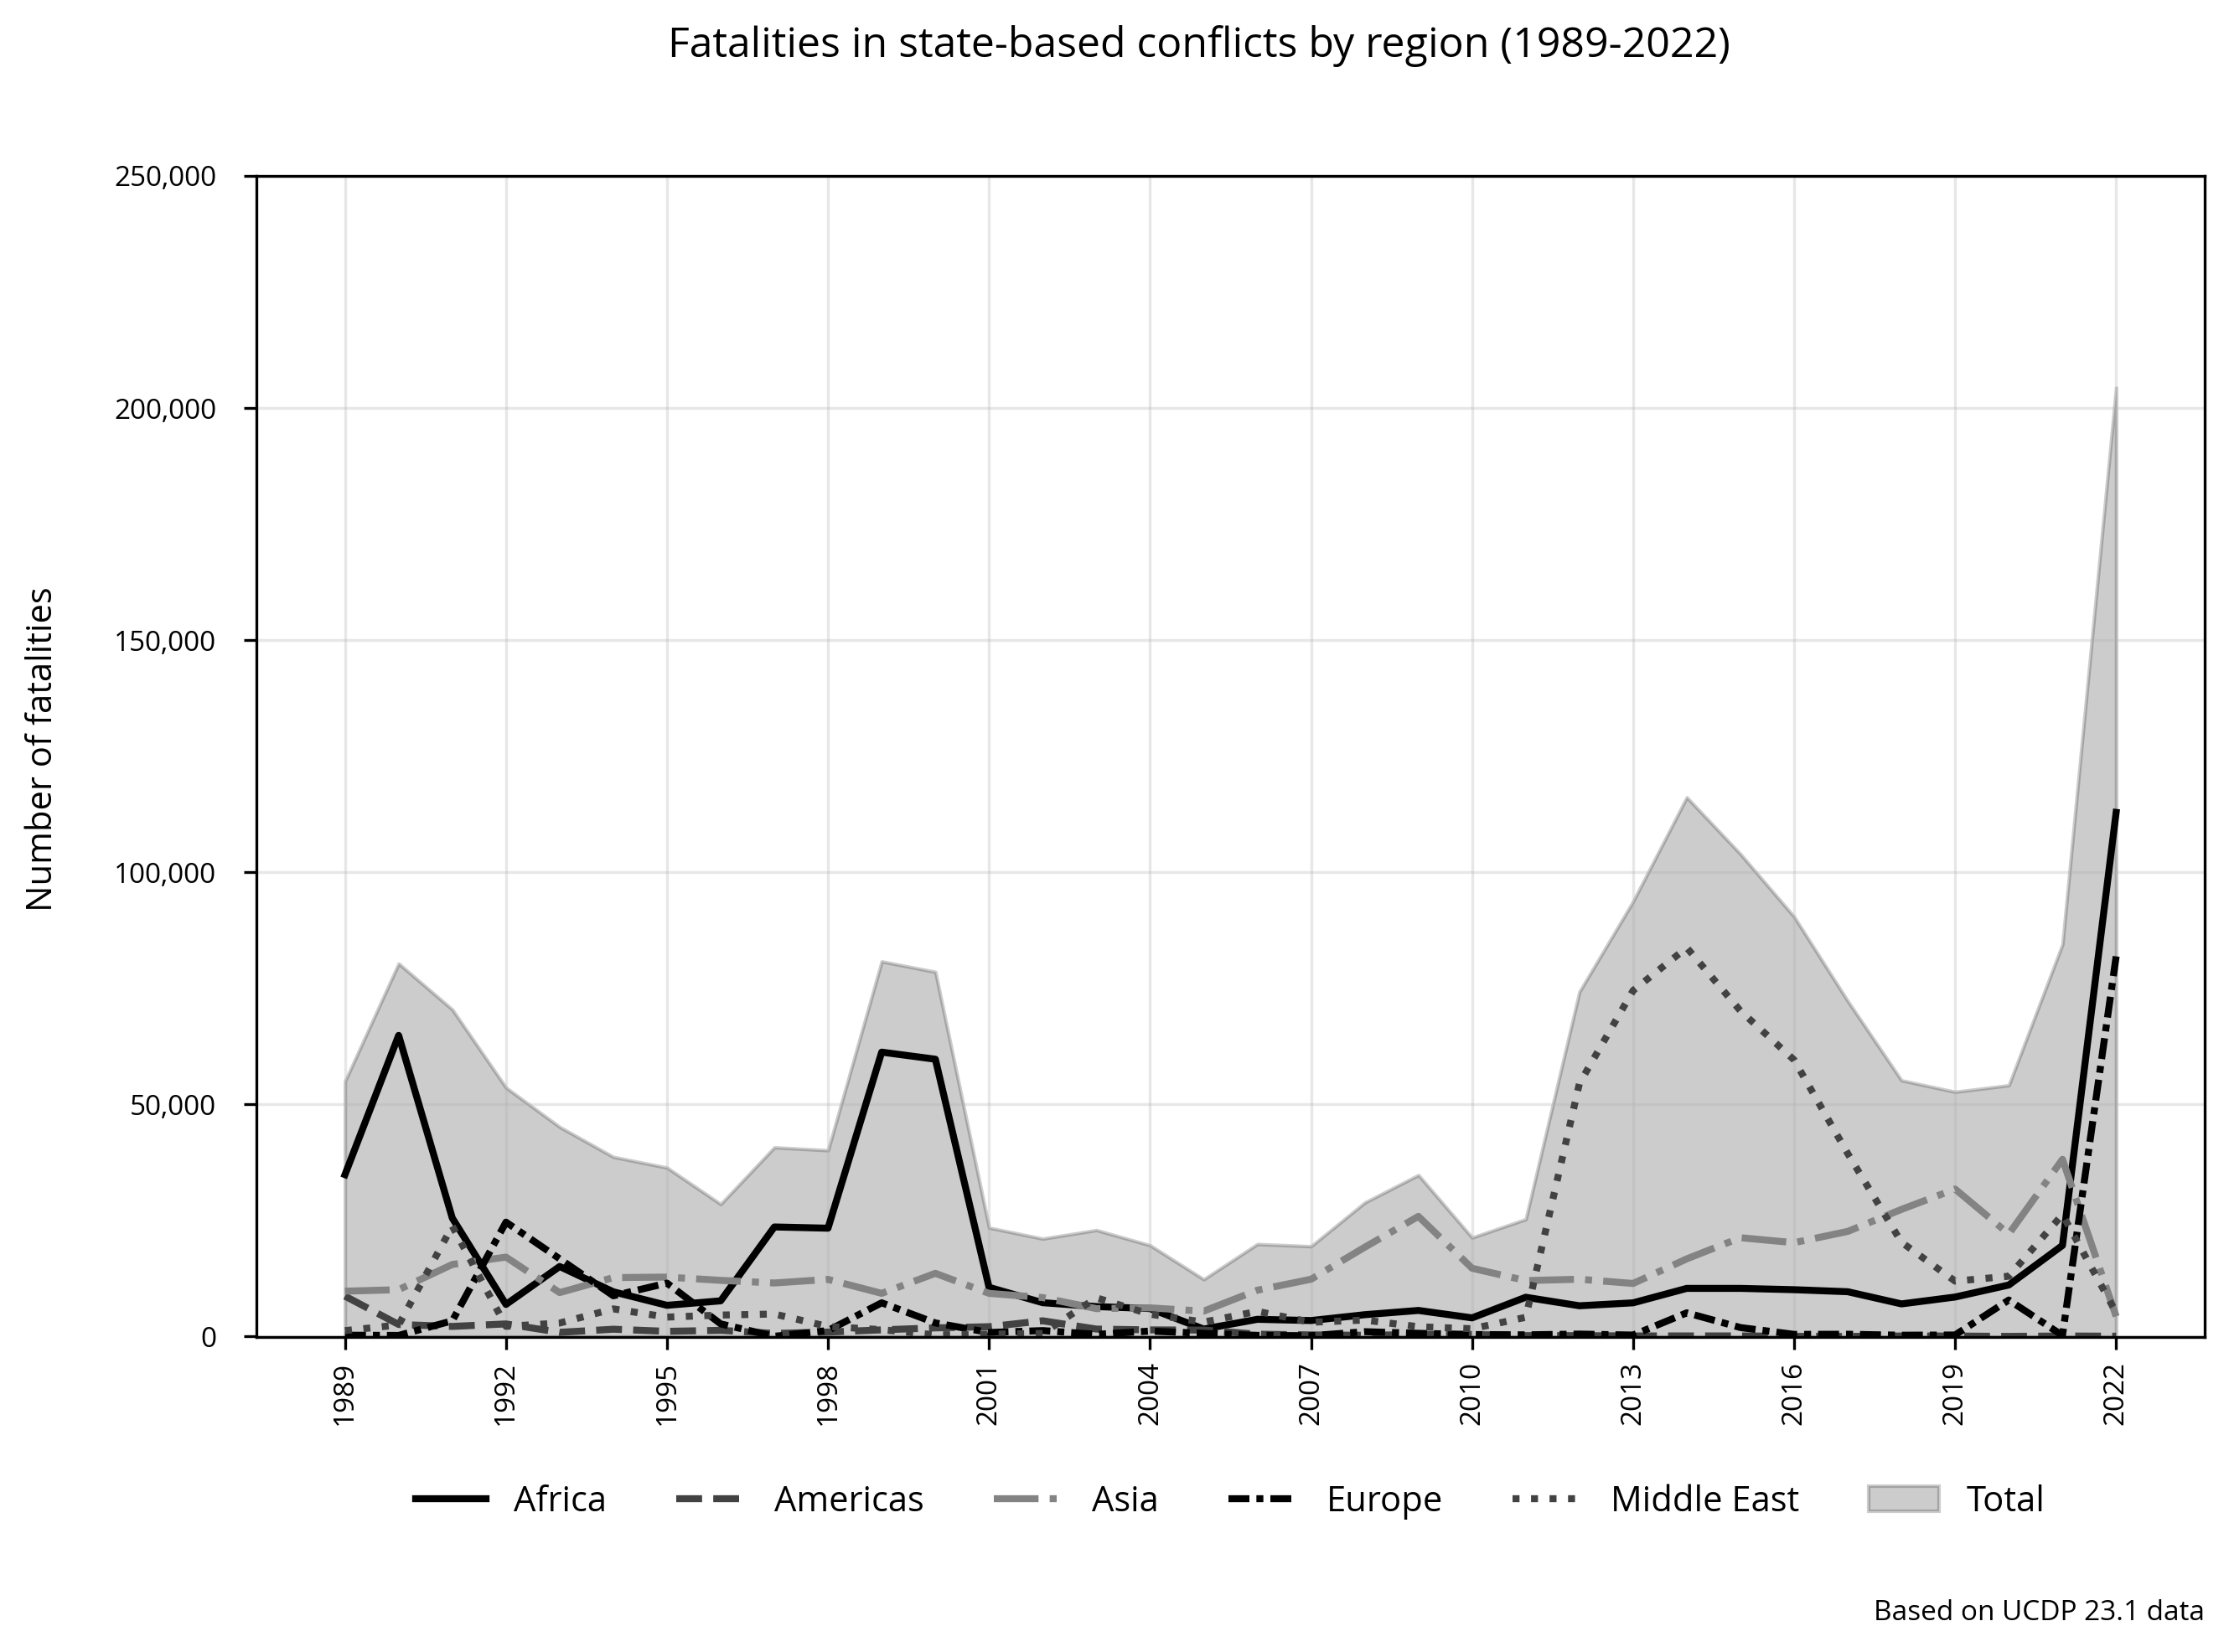 State-based: Fatalities by region